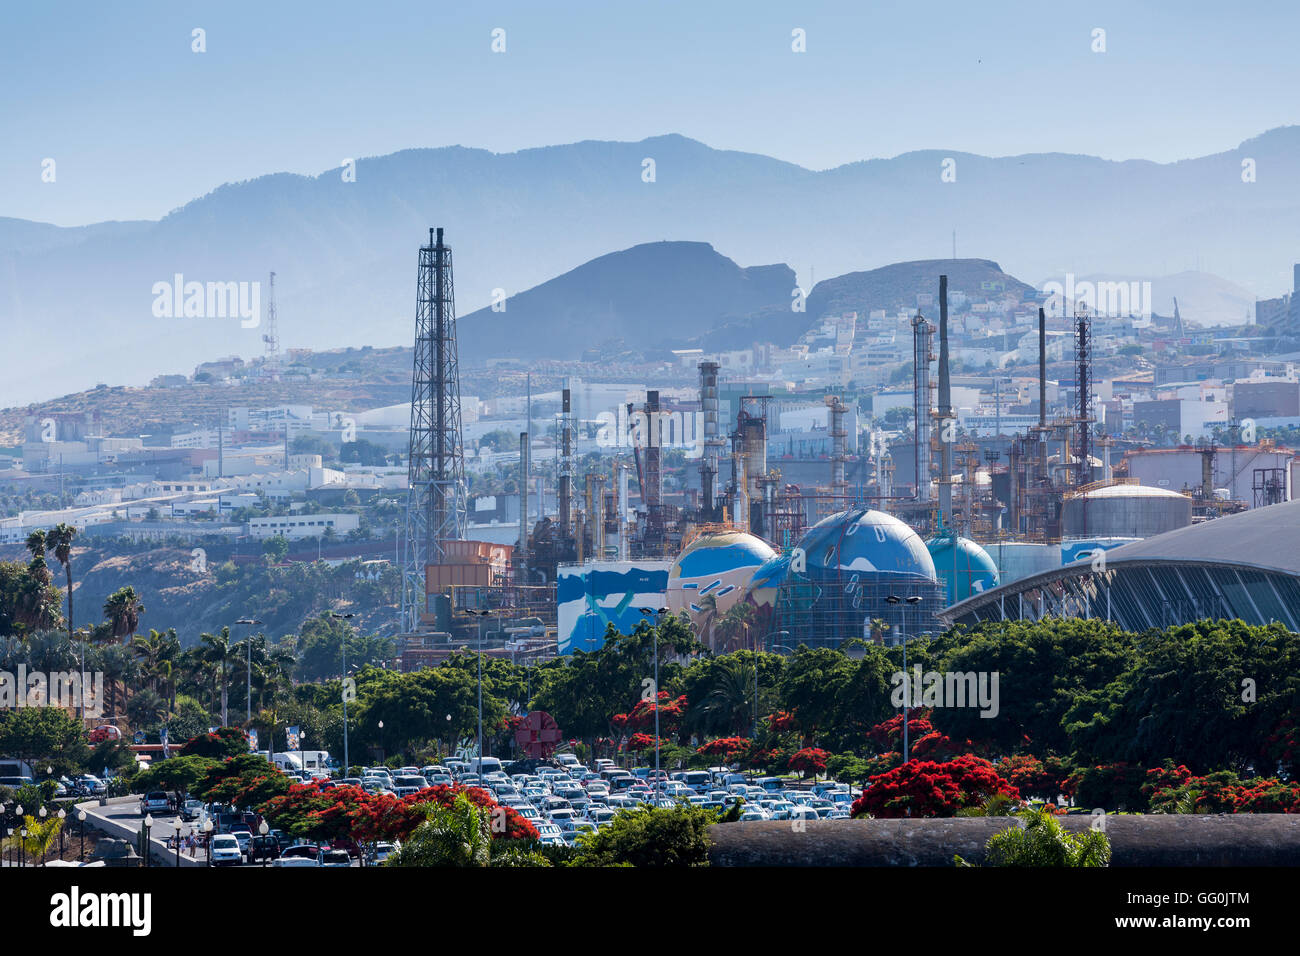 Industrial area to the south of Santa Cruz, including the old CEPSA oil refinary now a storage depot, Tenerife, Canary Islands, Stock Photo